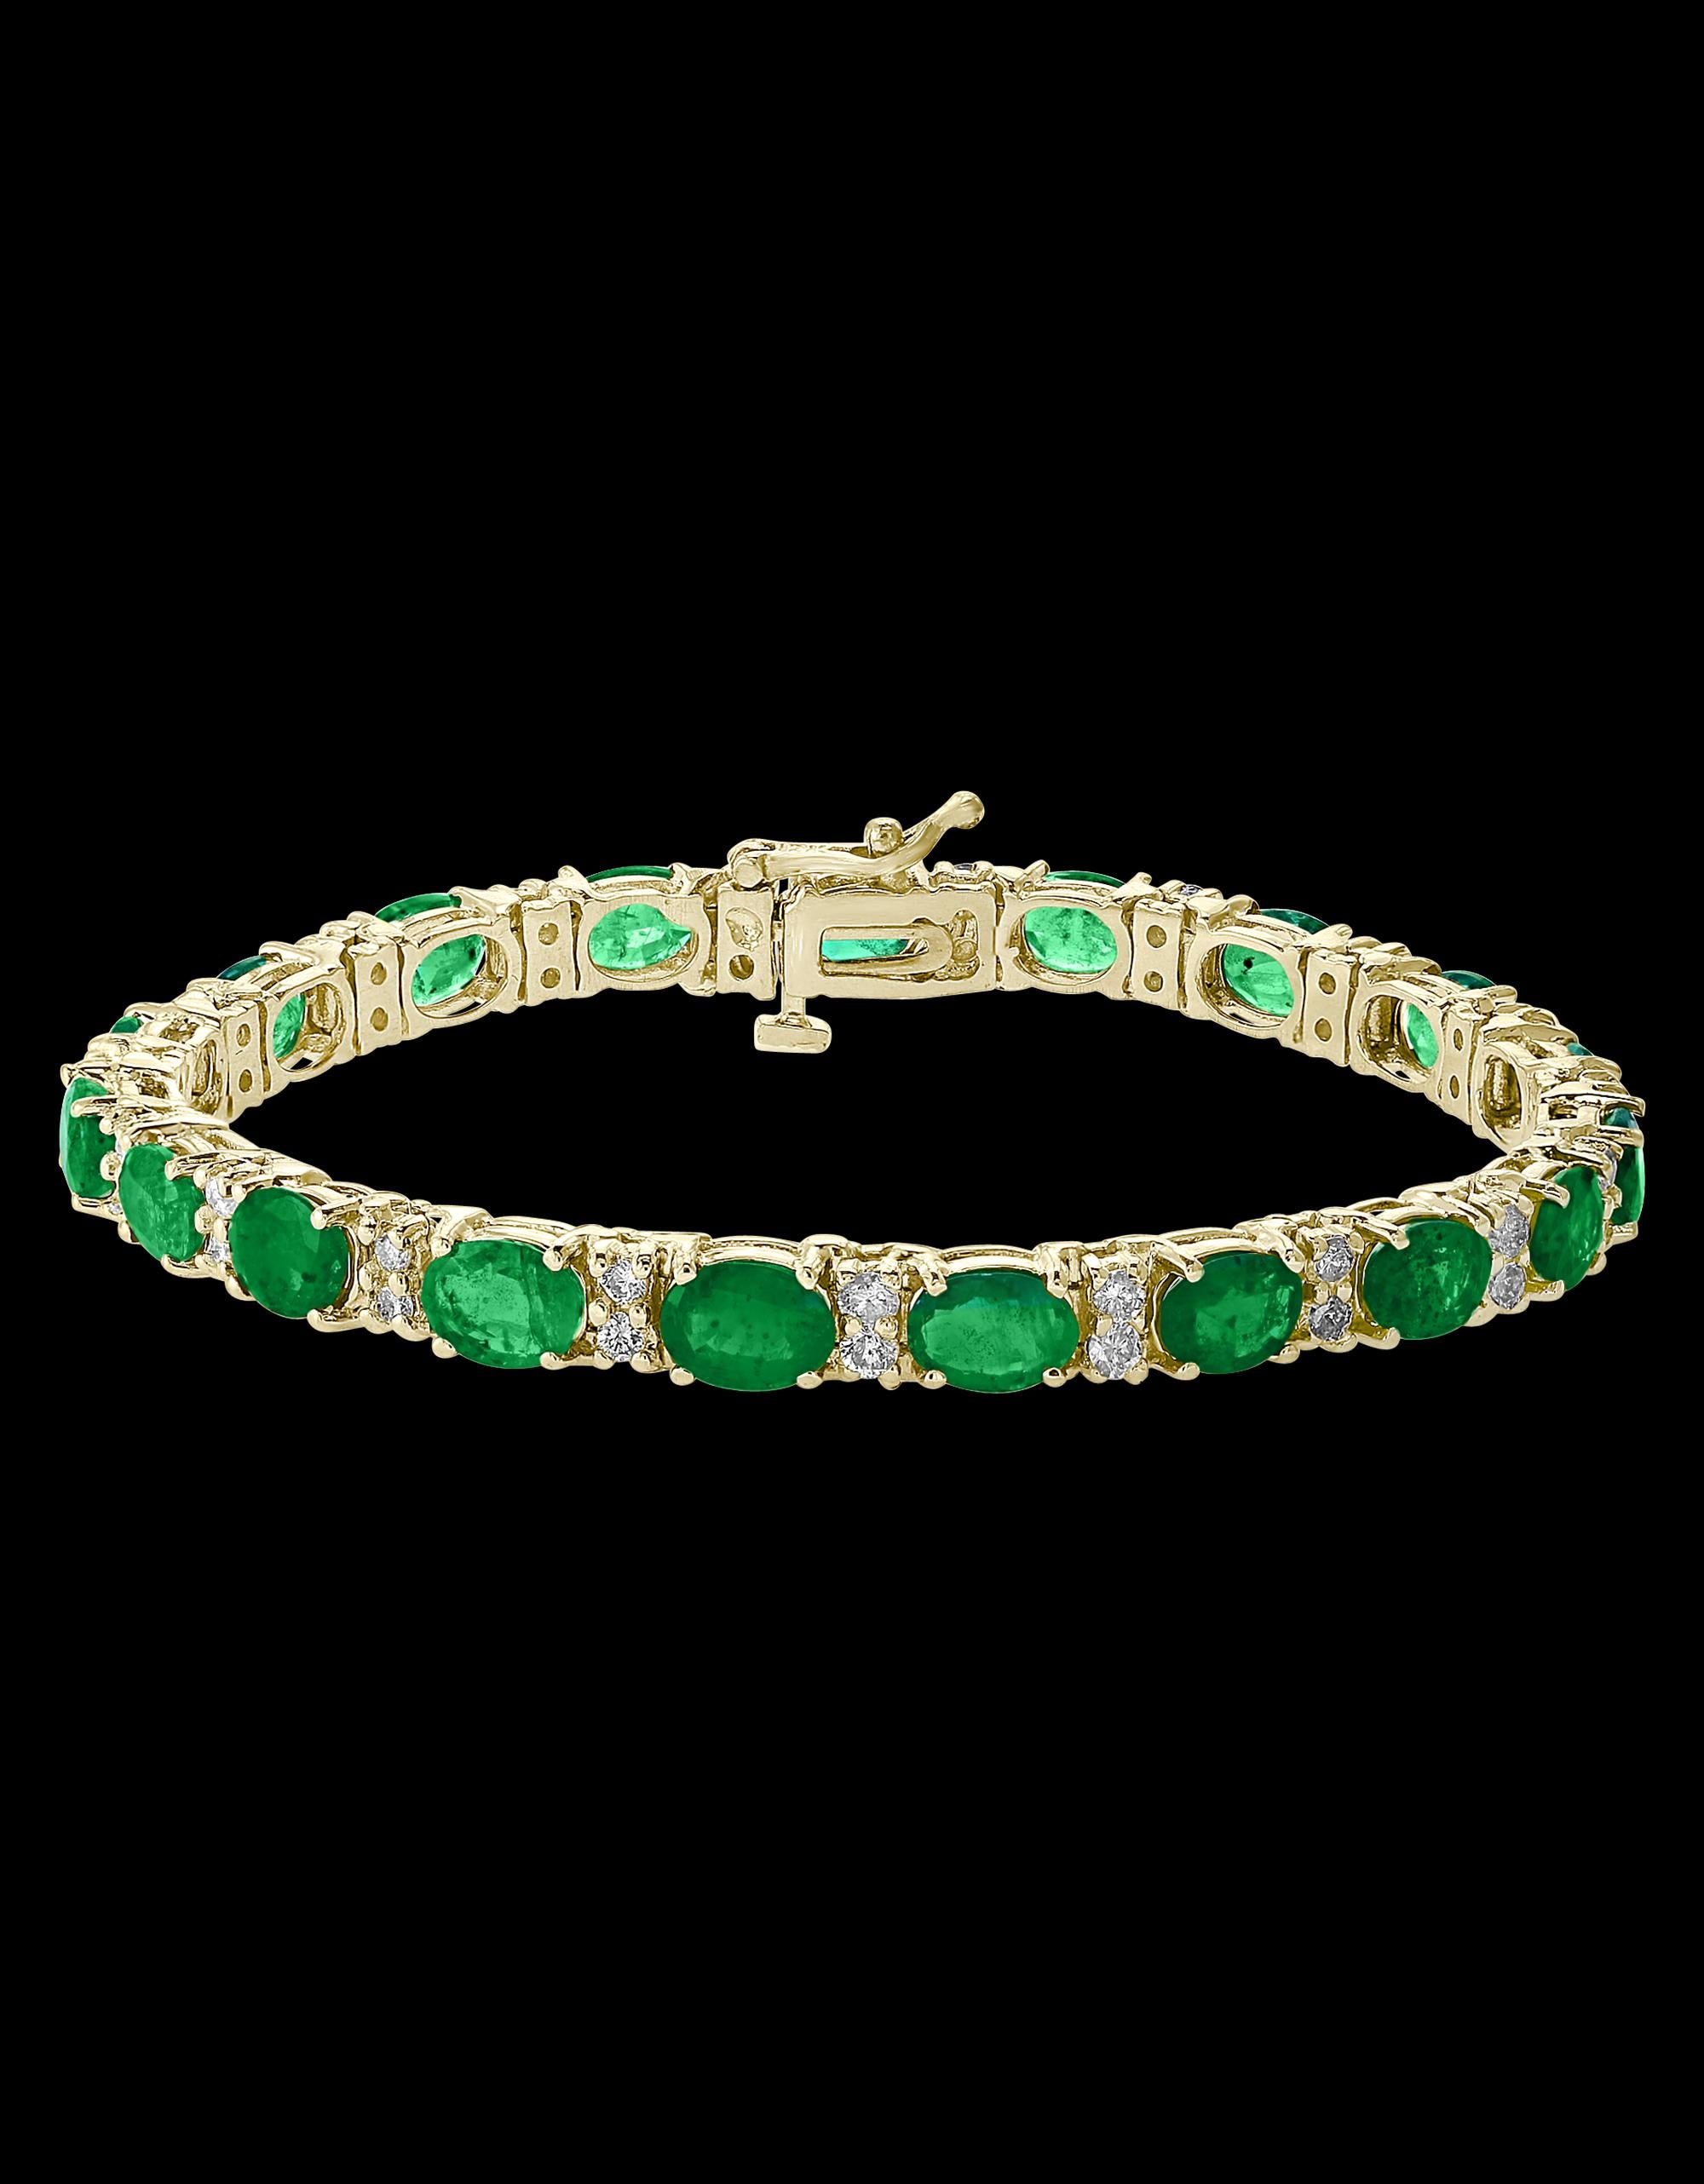  This exceptionally affordable Tennis  bracelet has  18 stones of oval  Emeralds  . Each Emerald is spaced by two diamonds . Total weight of the Emeralds is  approximately 15 carat. Total number of diamonds are 36 and diamond weighs is about 1.0